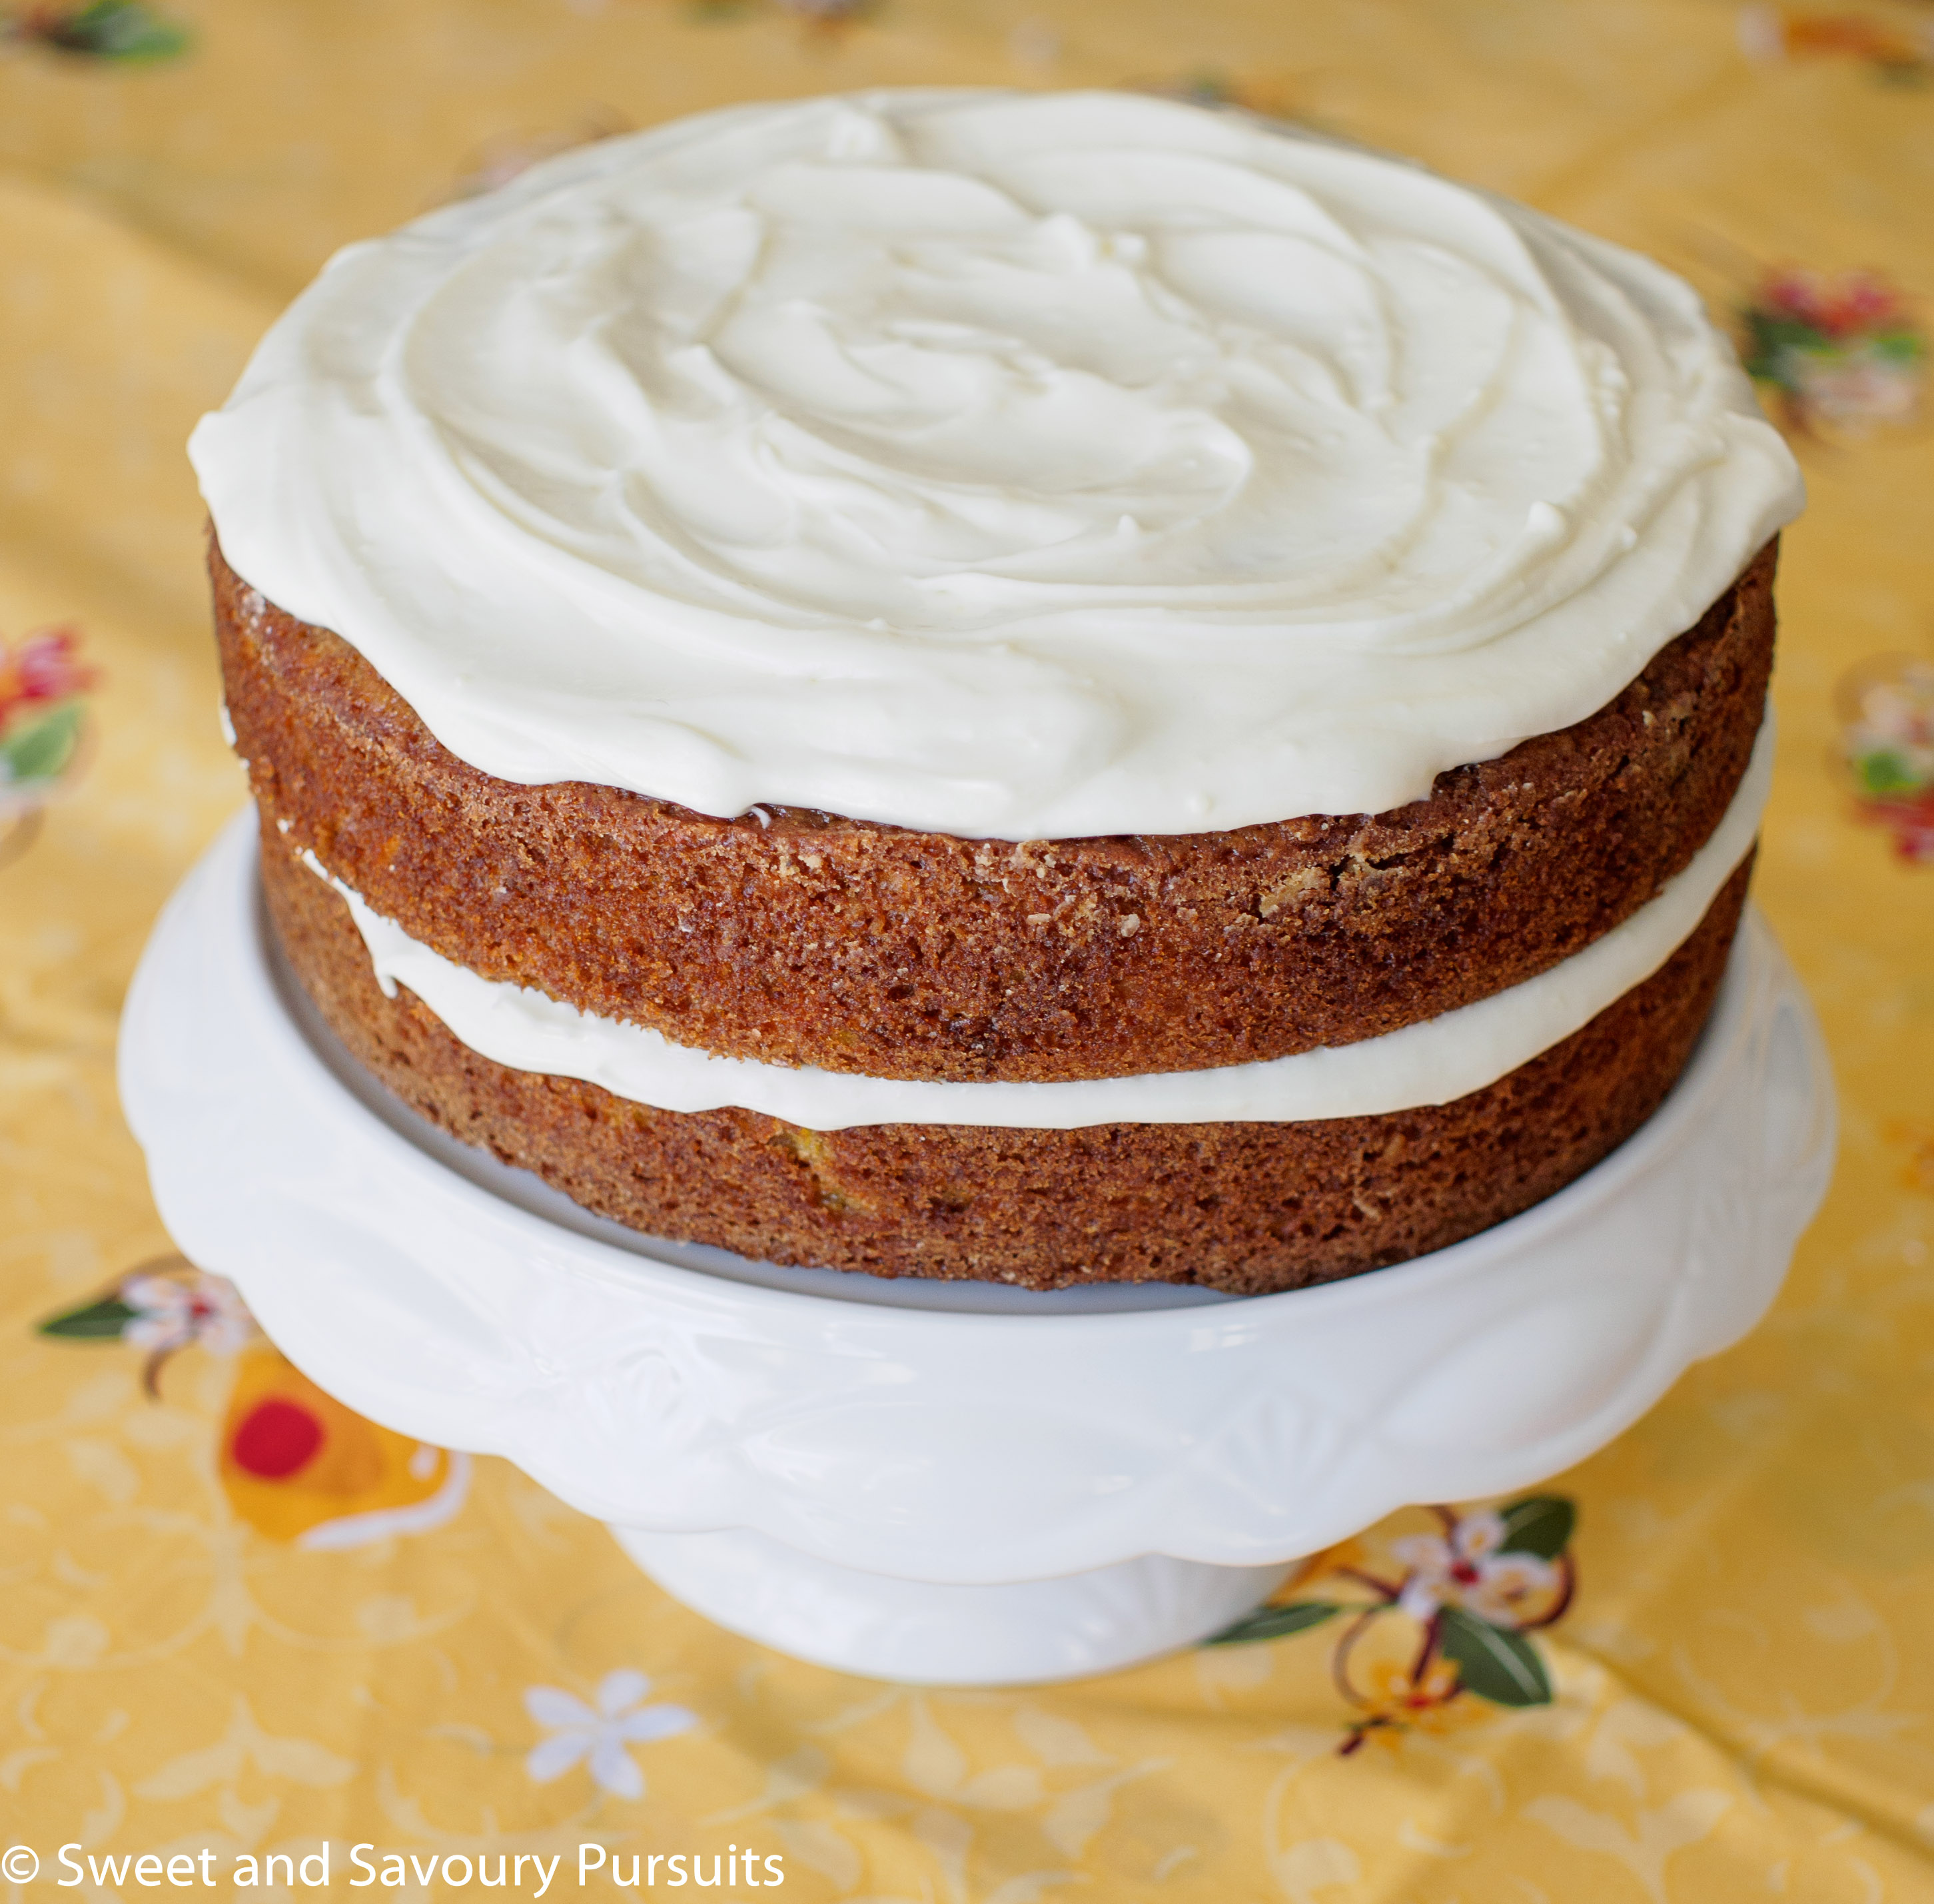 Carrot Cake with Cream Cheese Frosting on cake stand.